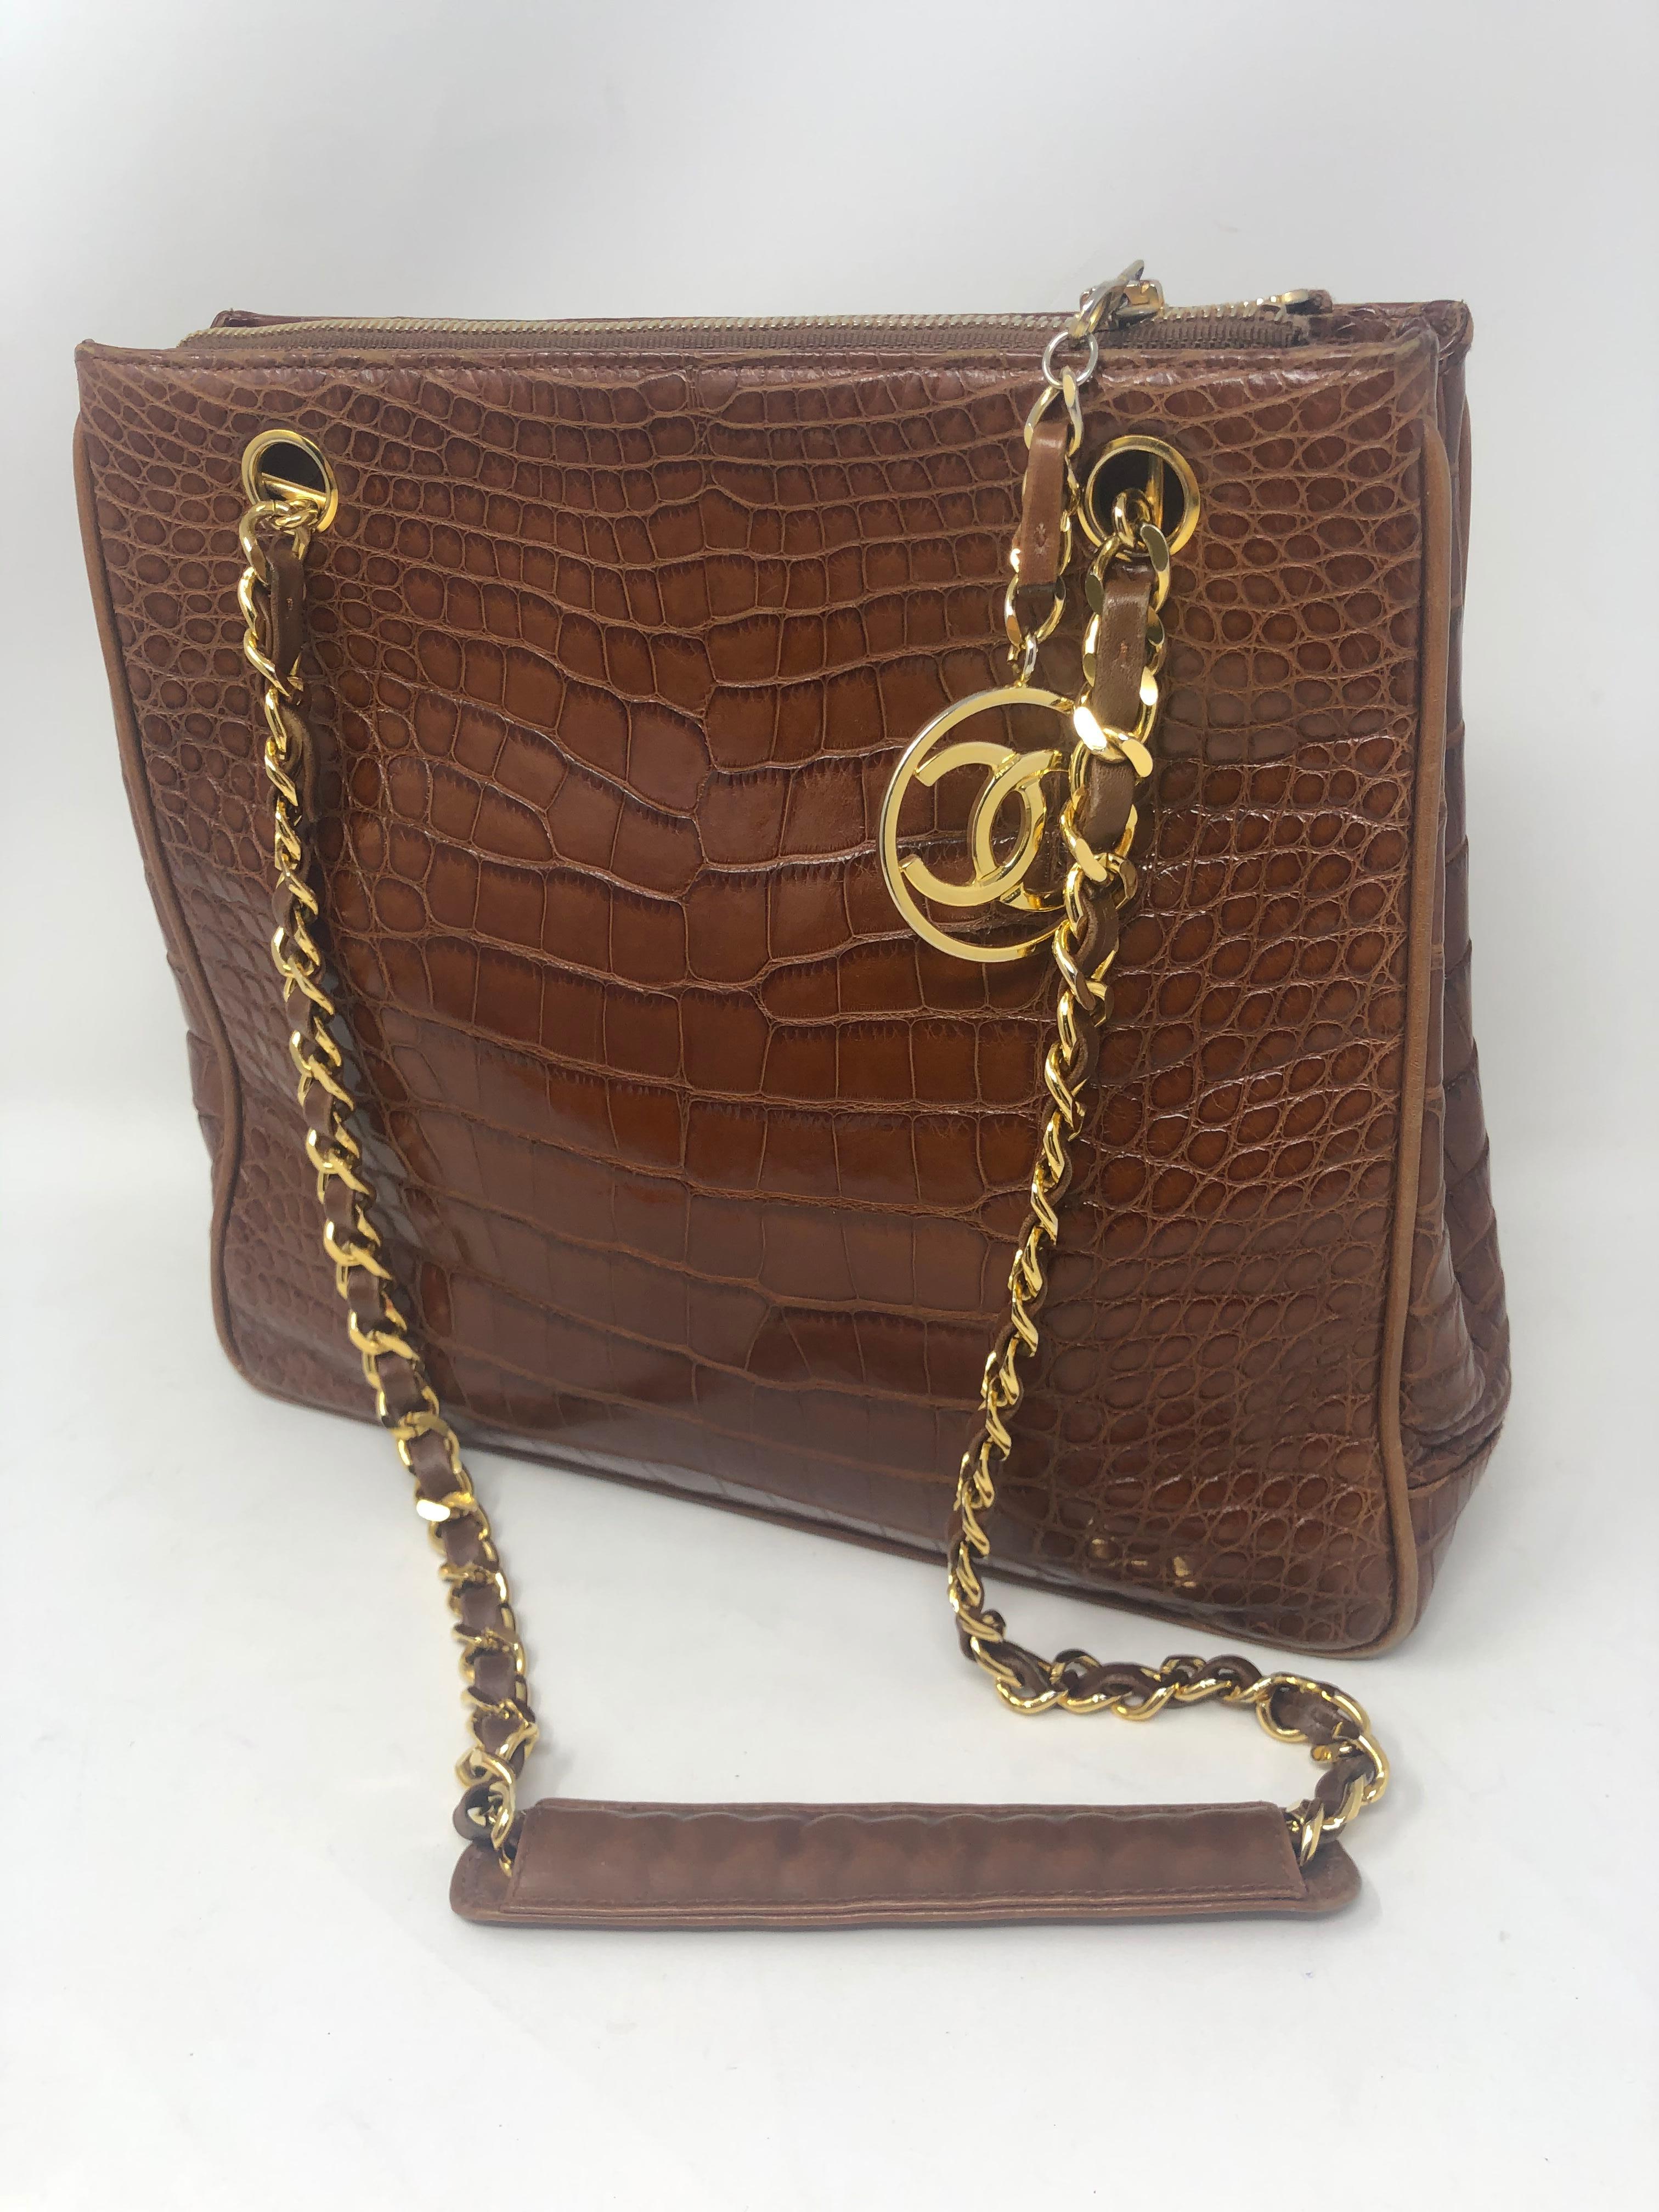 Chanel Brown Crocodile Handbag. Vintage crocodile bag with gold hardware. Excellent condition. Clean interior with all leather compartments. Beautiful croc skin tote bag with CC medallion hanging off bag. Rare crocodile for Chanel. Collector's